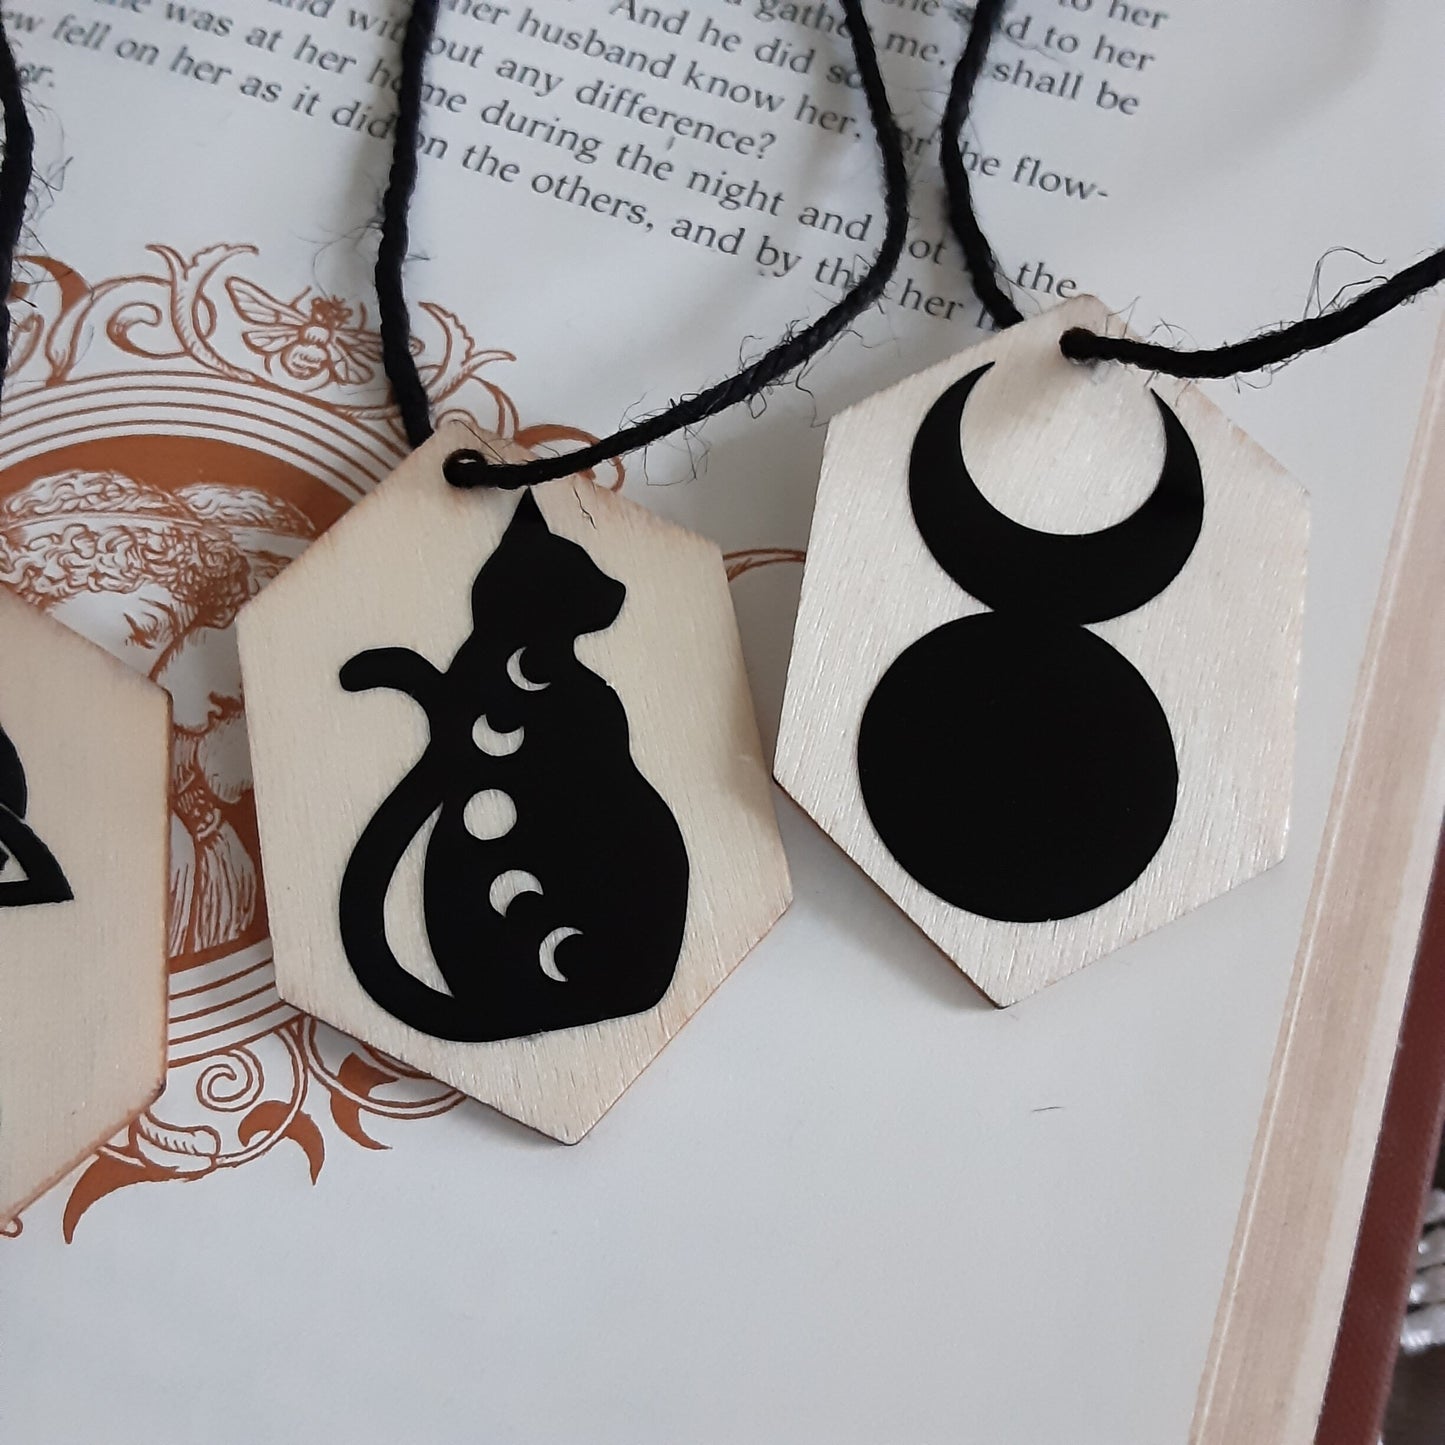 Yule ornaments, 1 pc wooden decor, Triquetra, Black Cat, Mushroom, Horned God Pagan Holiday decor, Witchy Gothic vibes, Pagan